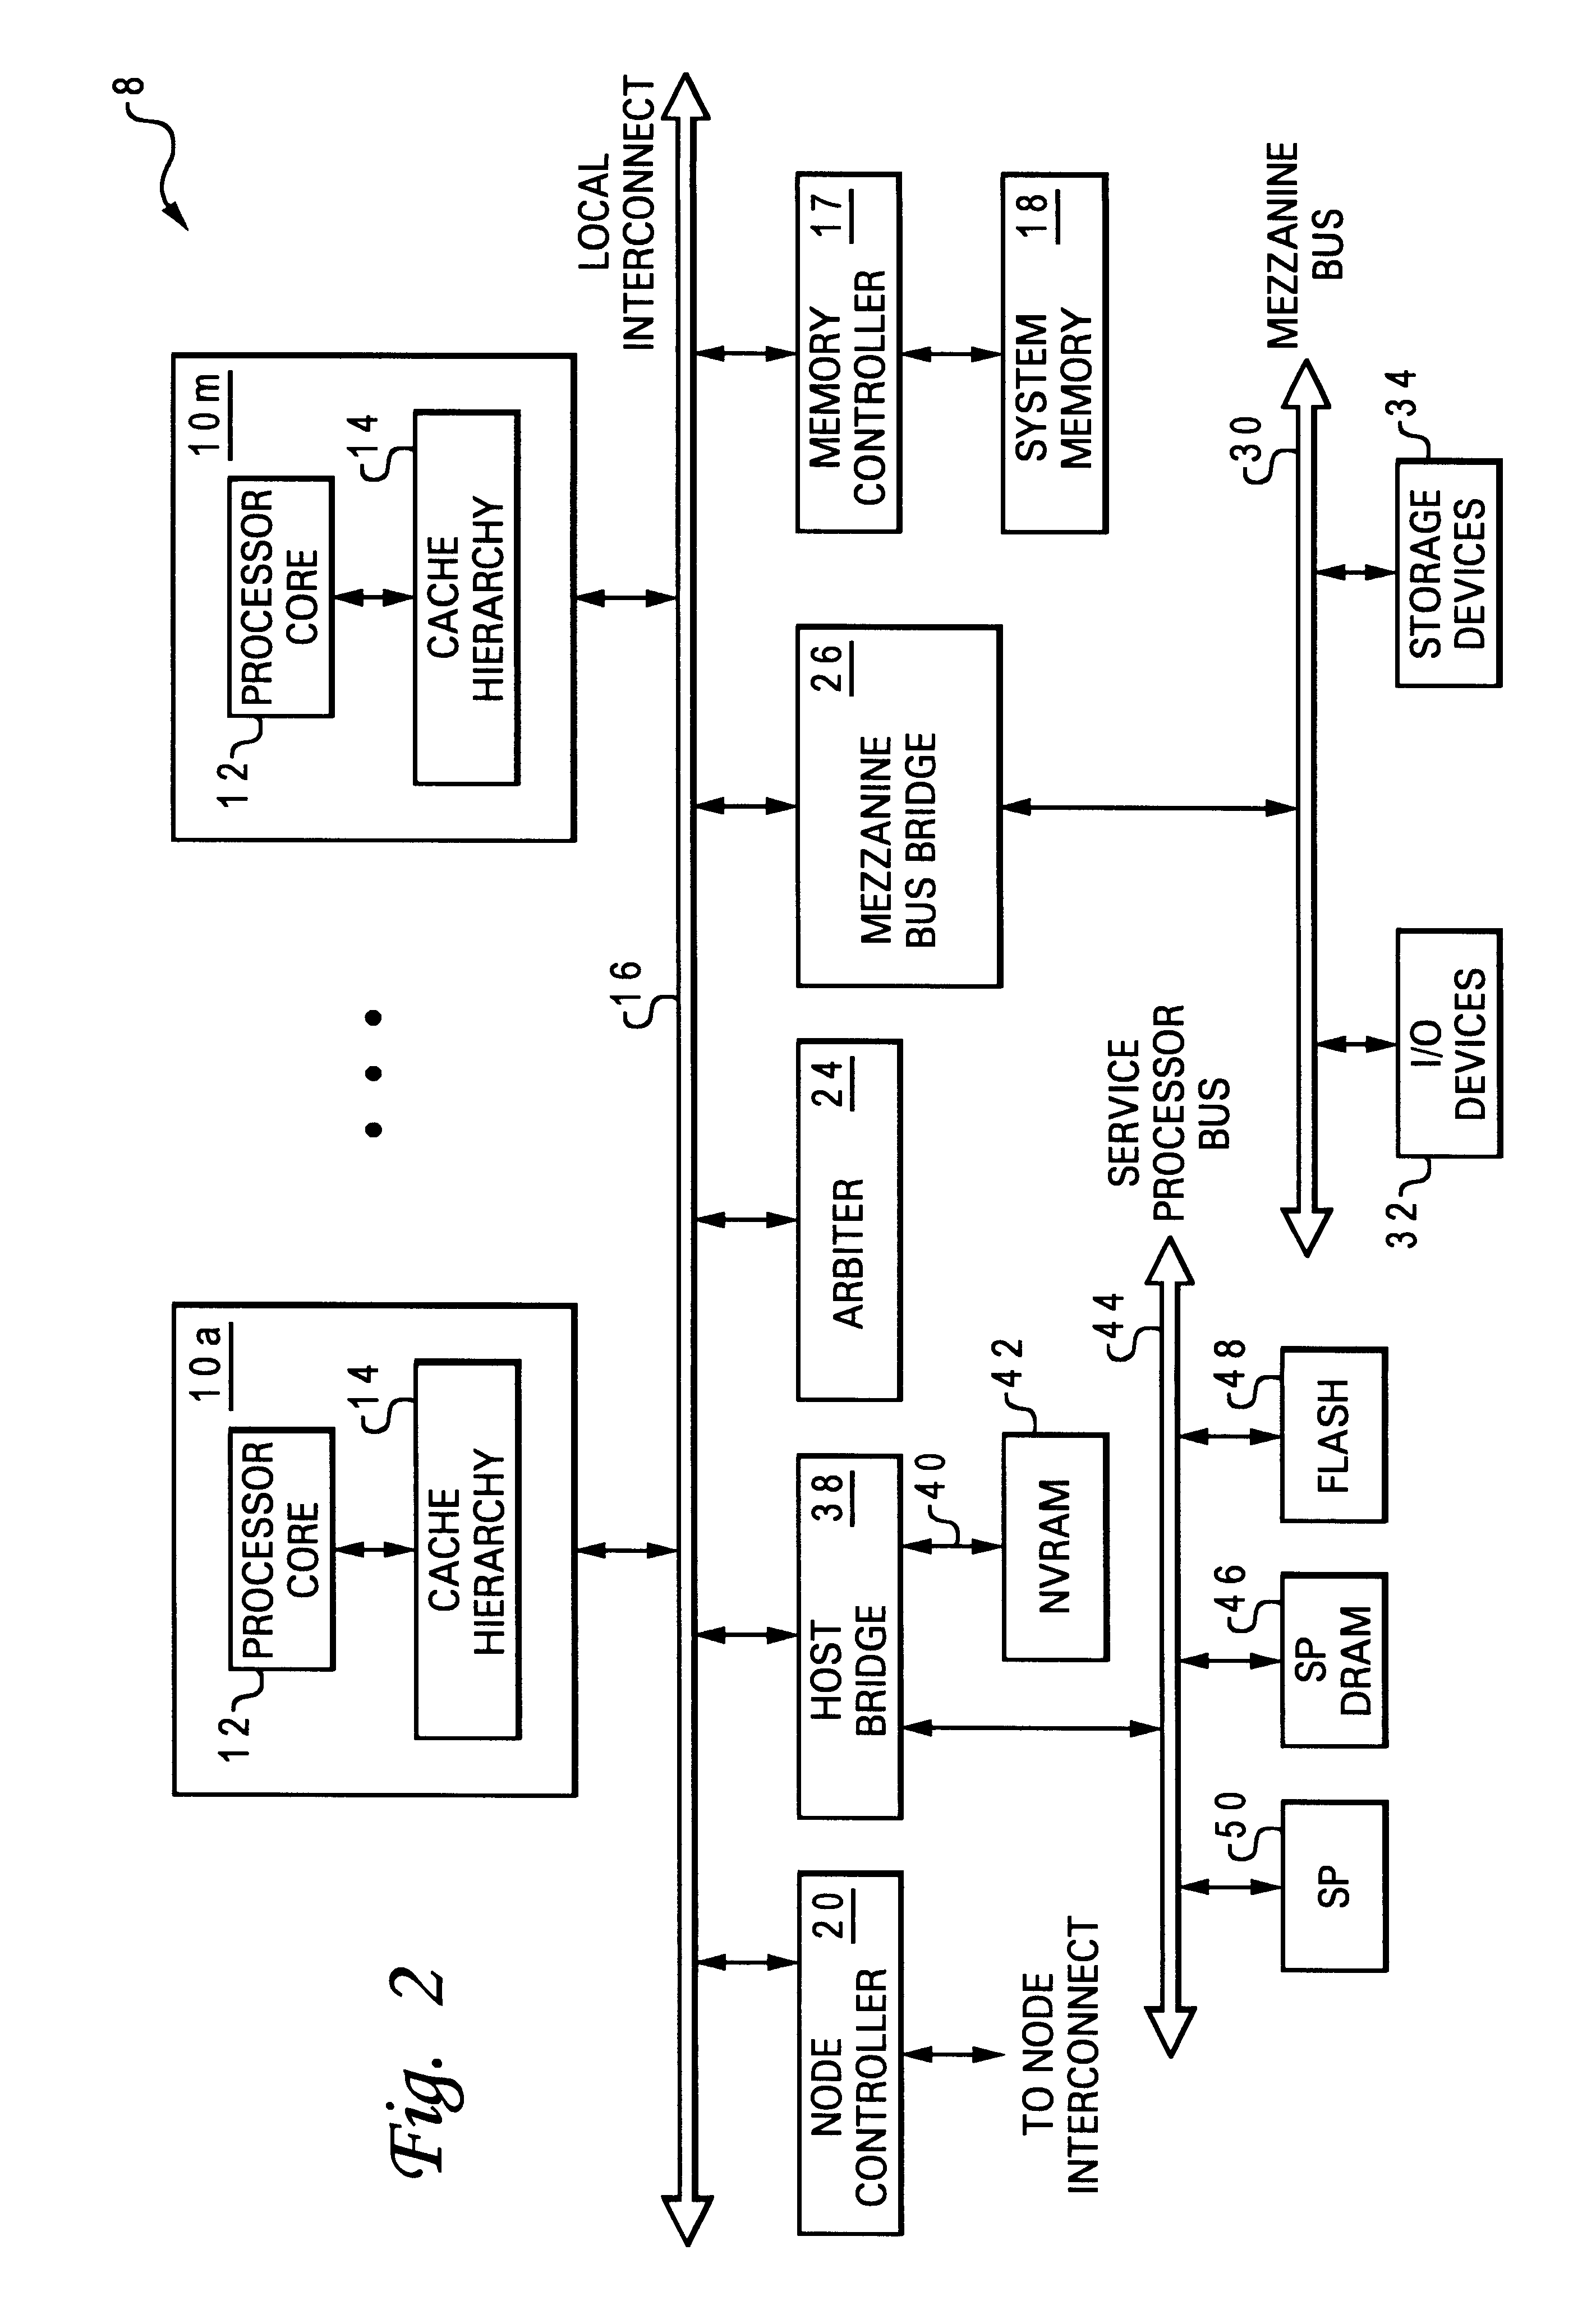 Interconnected processing nodes configurable as at least one non-uniform memory access (NUMA) data processing system